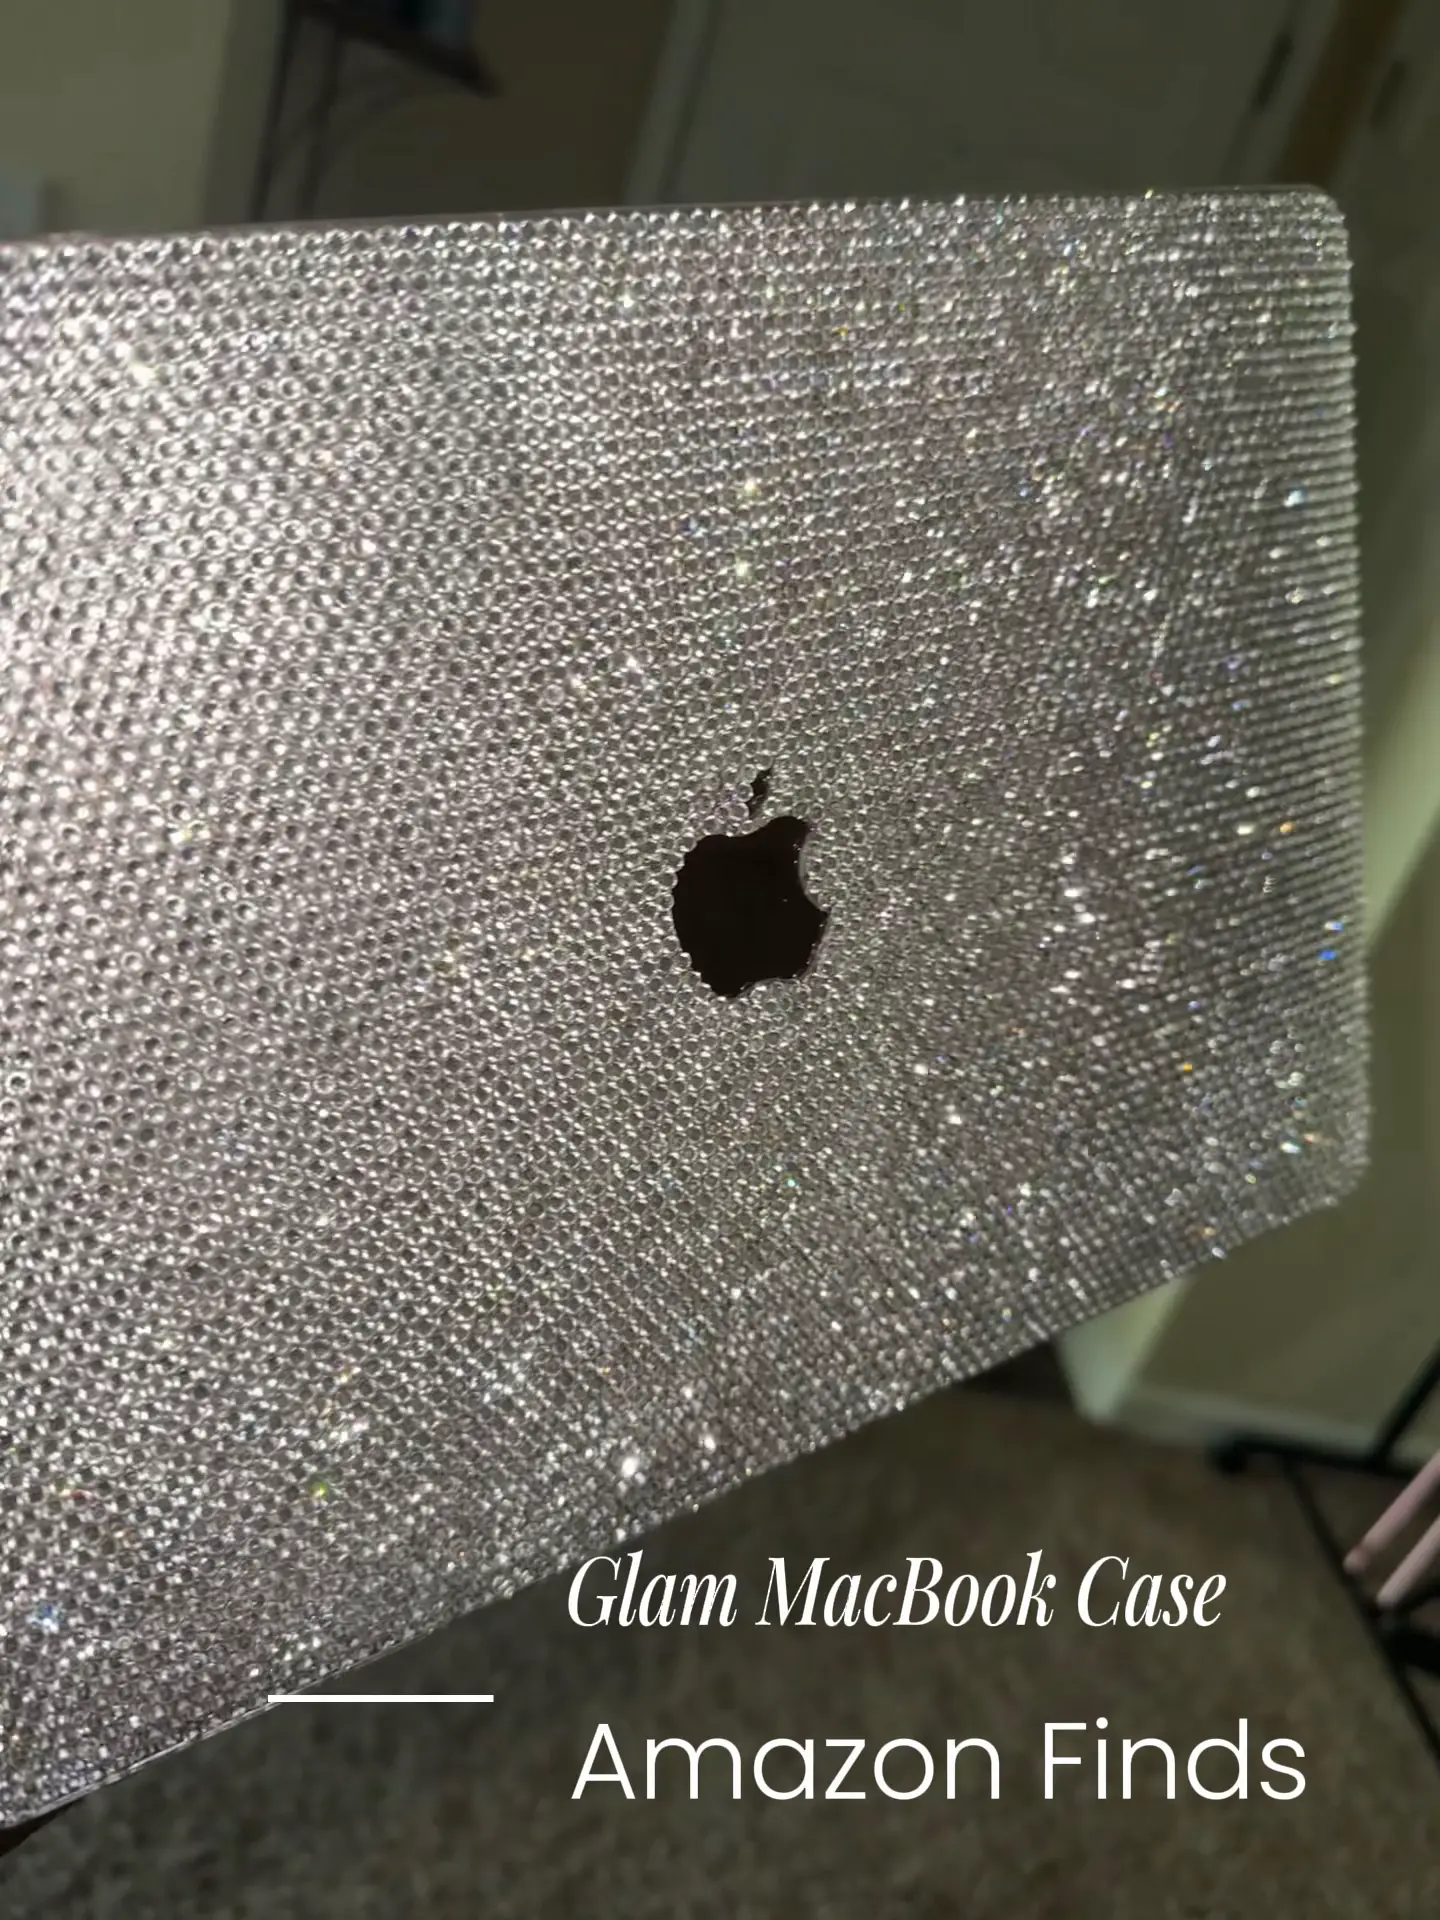 The most GLAM MacBook Case 's images